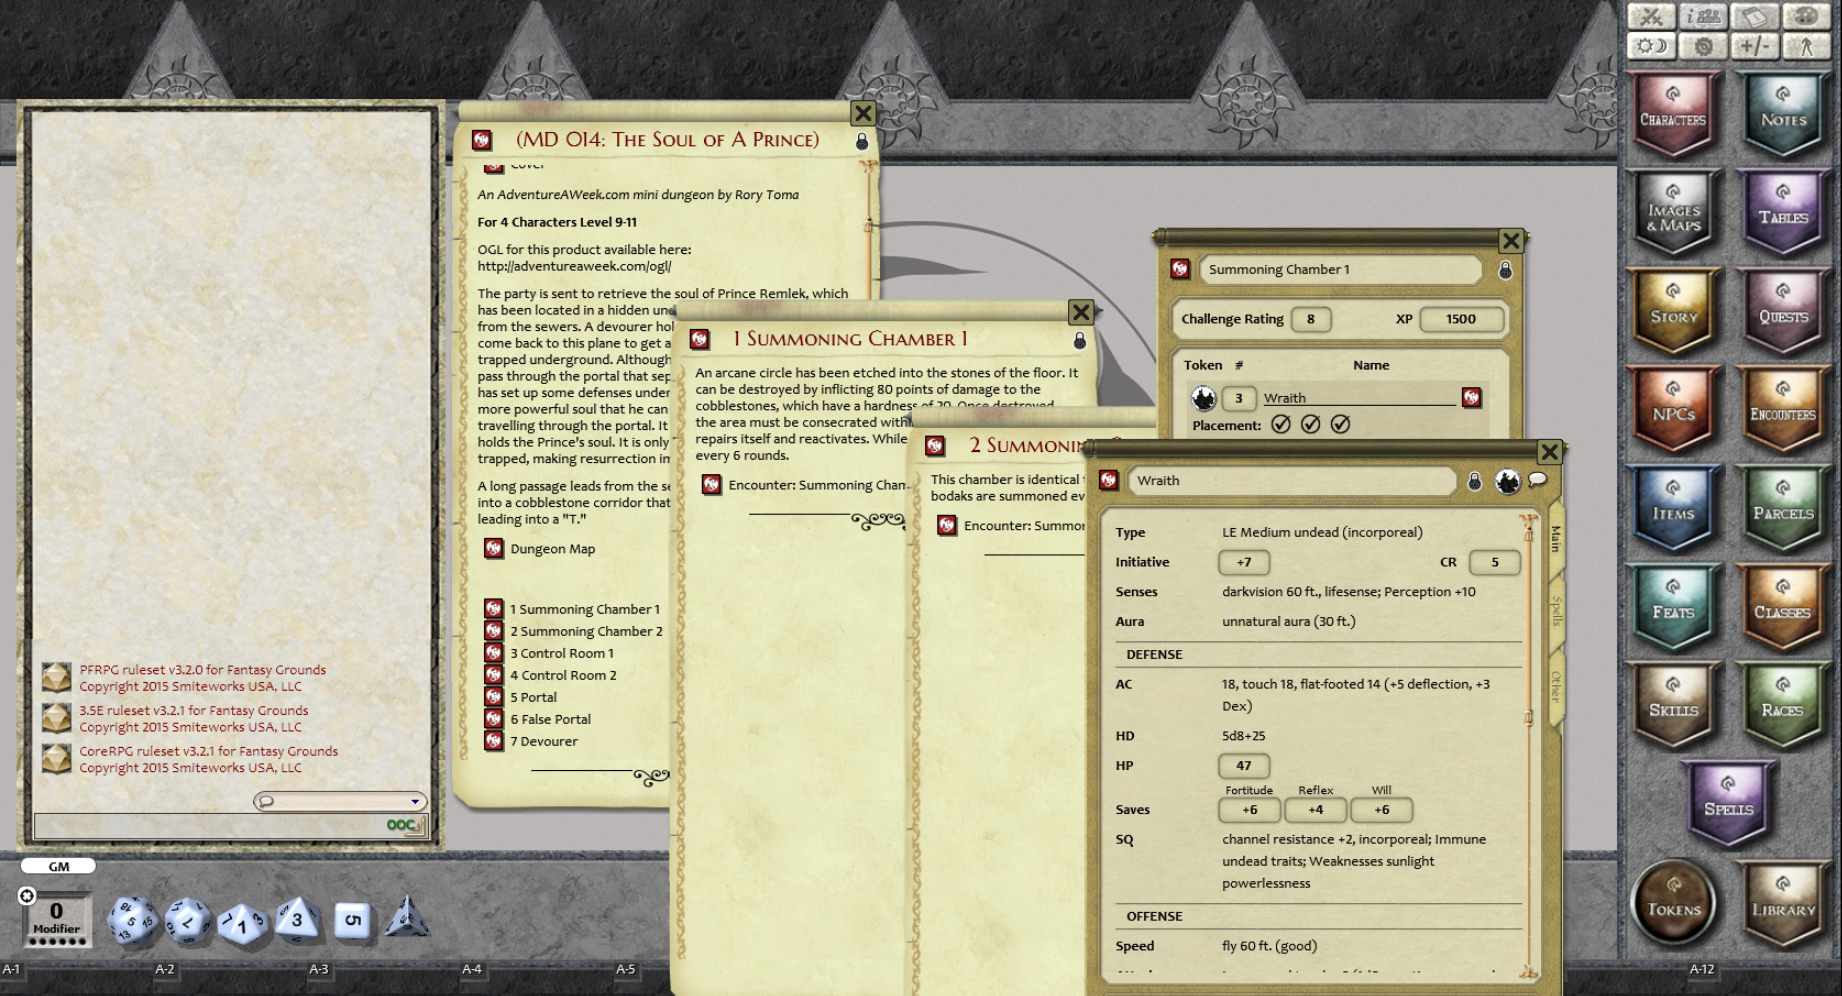 Fantasy Grounds - Mini-Dungeon #014: The Soul of a Prince (PFRPG) Featured Screenshot #1